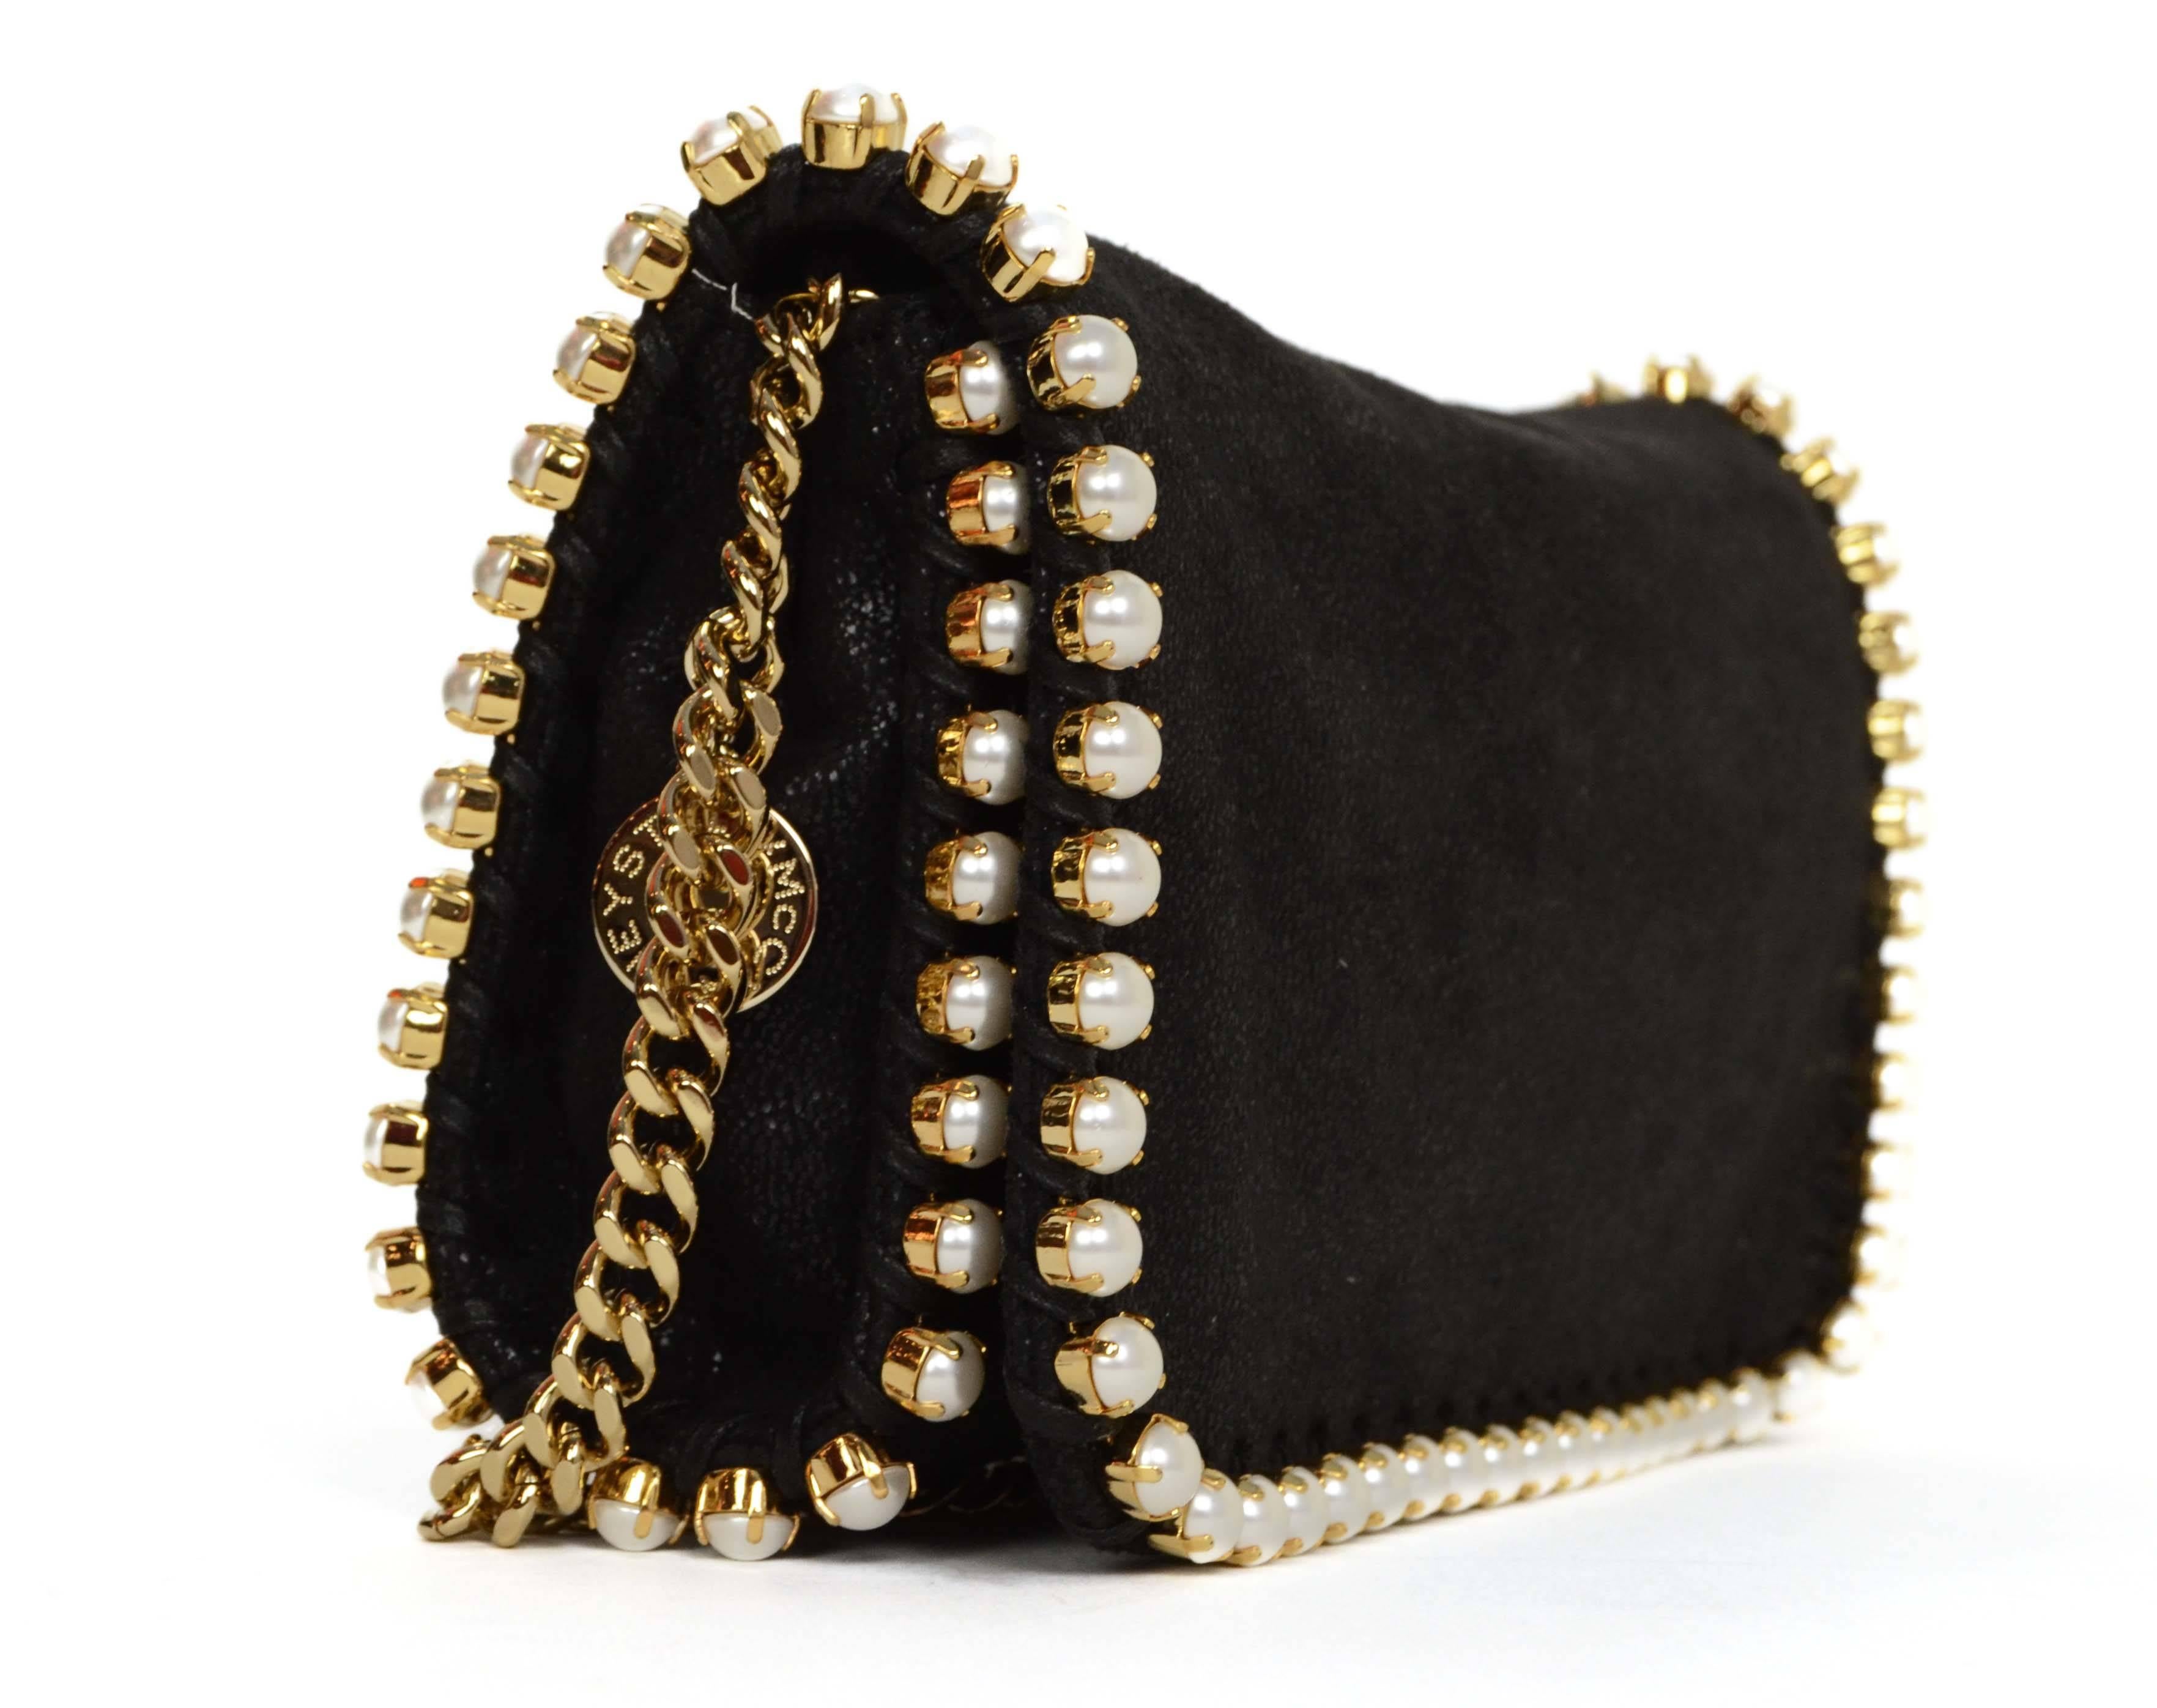 Stella McCartney Black Falabella Pearly-Trim Crossbody Bag 
Features optional chain link strap
Made In: Italy
Color: Black and ivory
Hardware: Goldtone
Materials: Vegan leather, faux pearls and metal
Lining: Dusty pink Stella McCartney logo